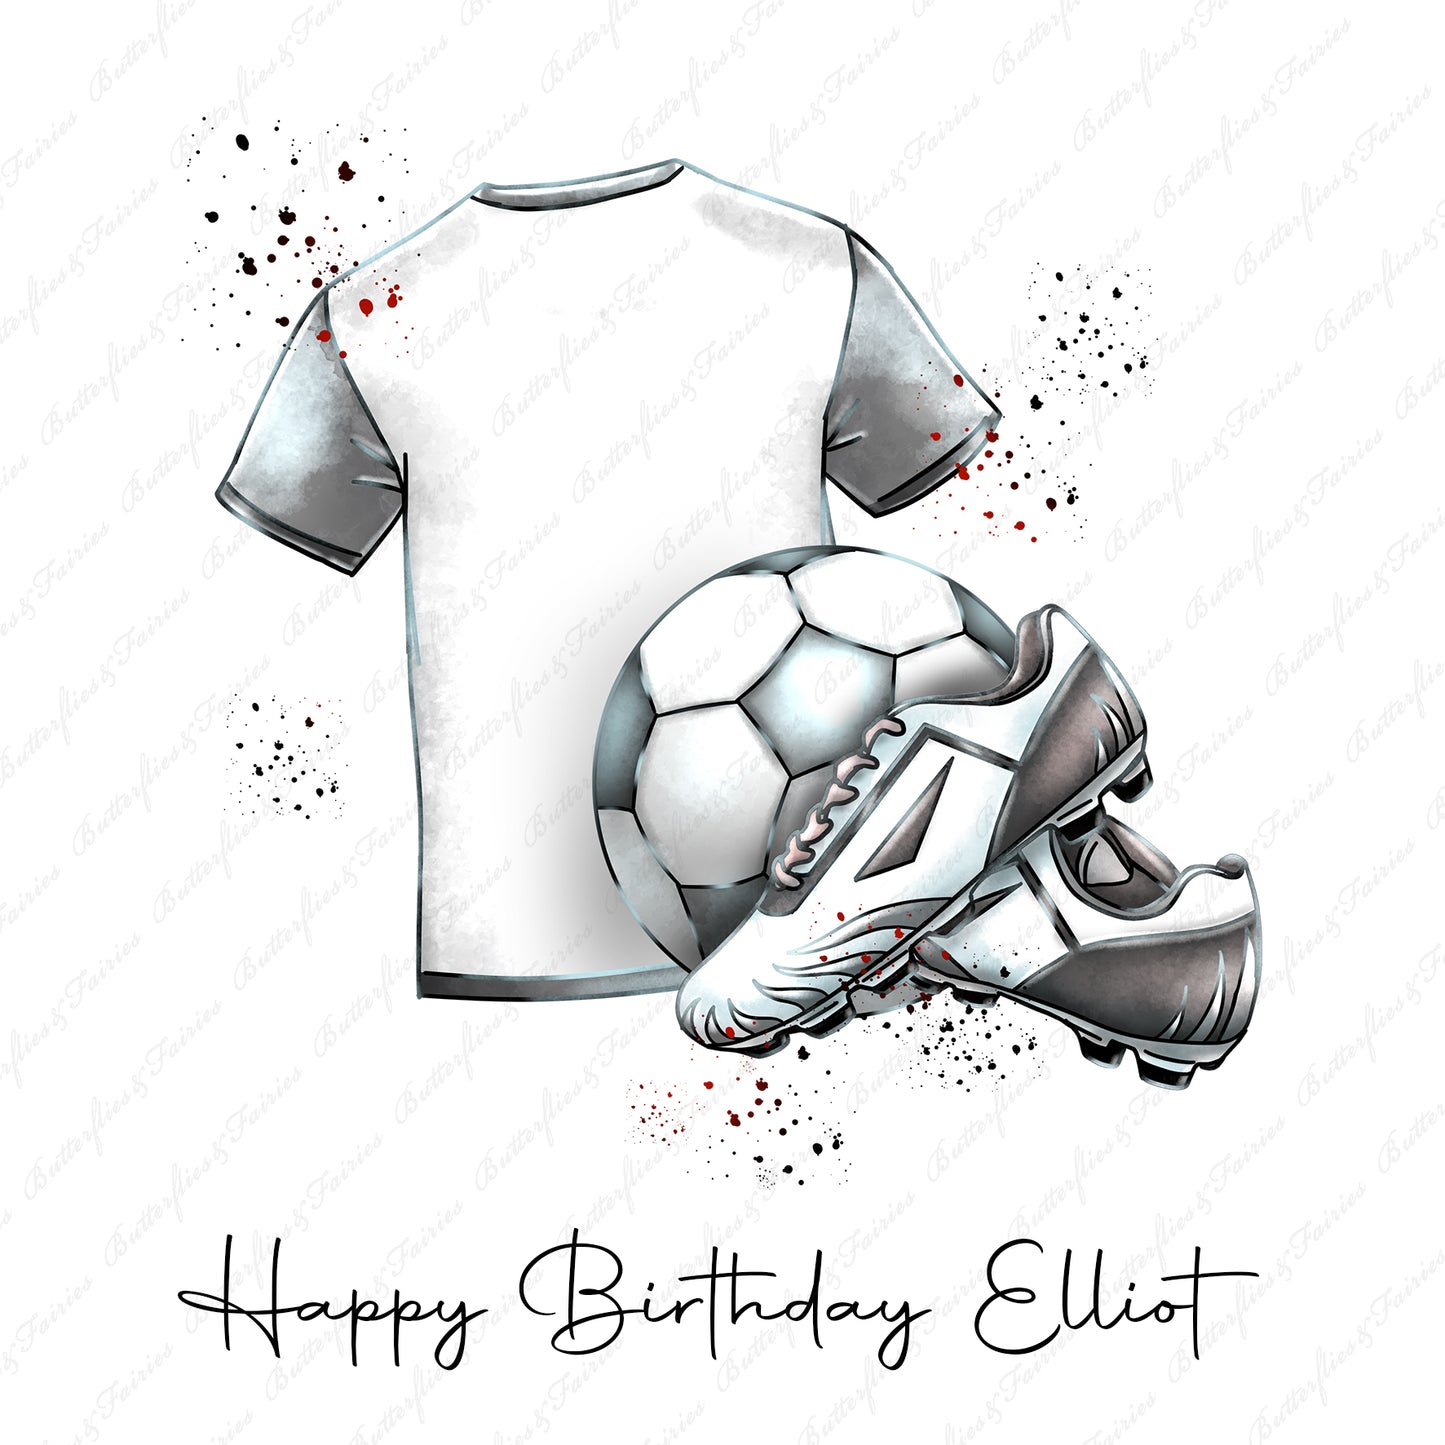 Personalised Football Birthday Card - Lots of kit colours available